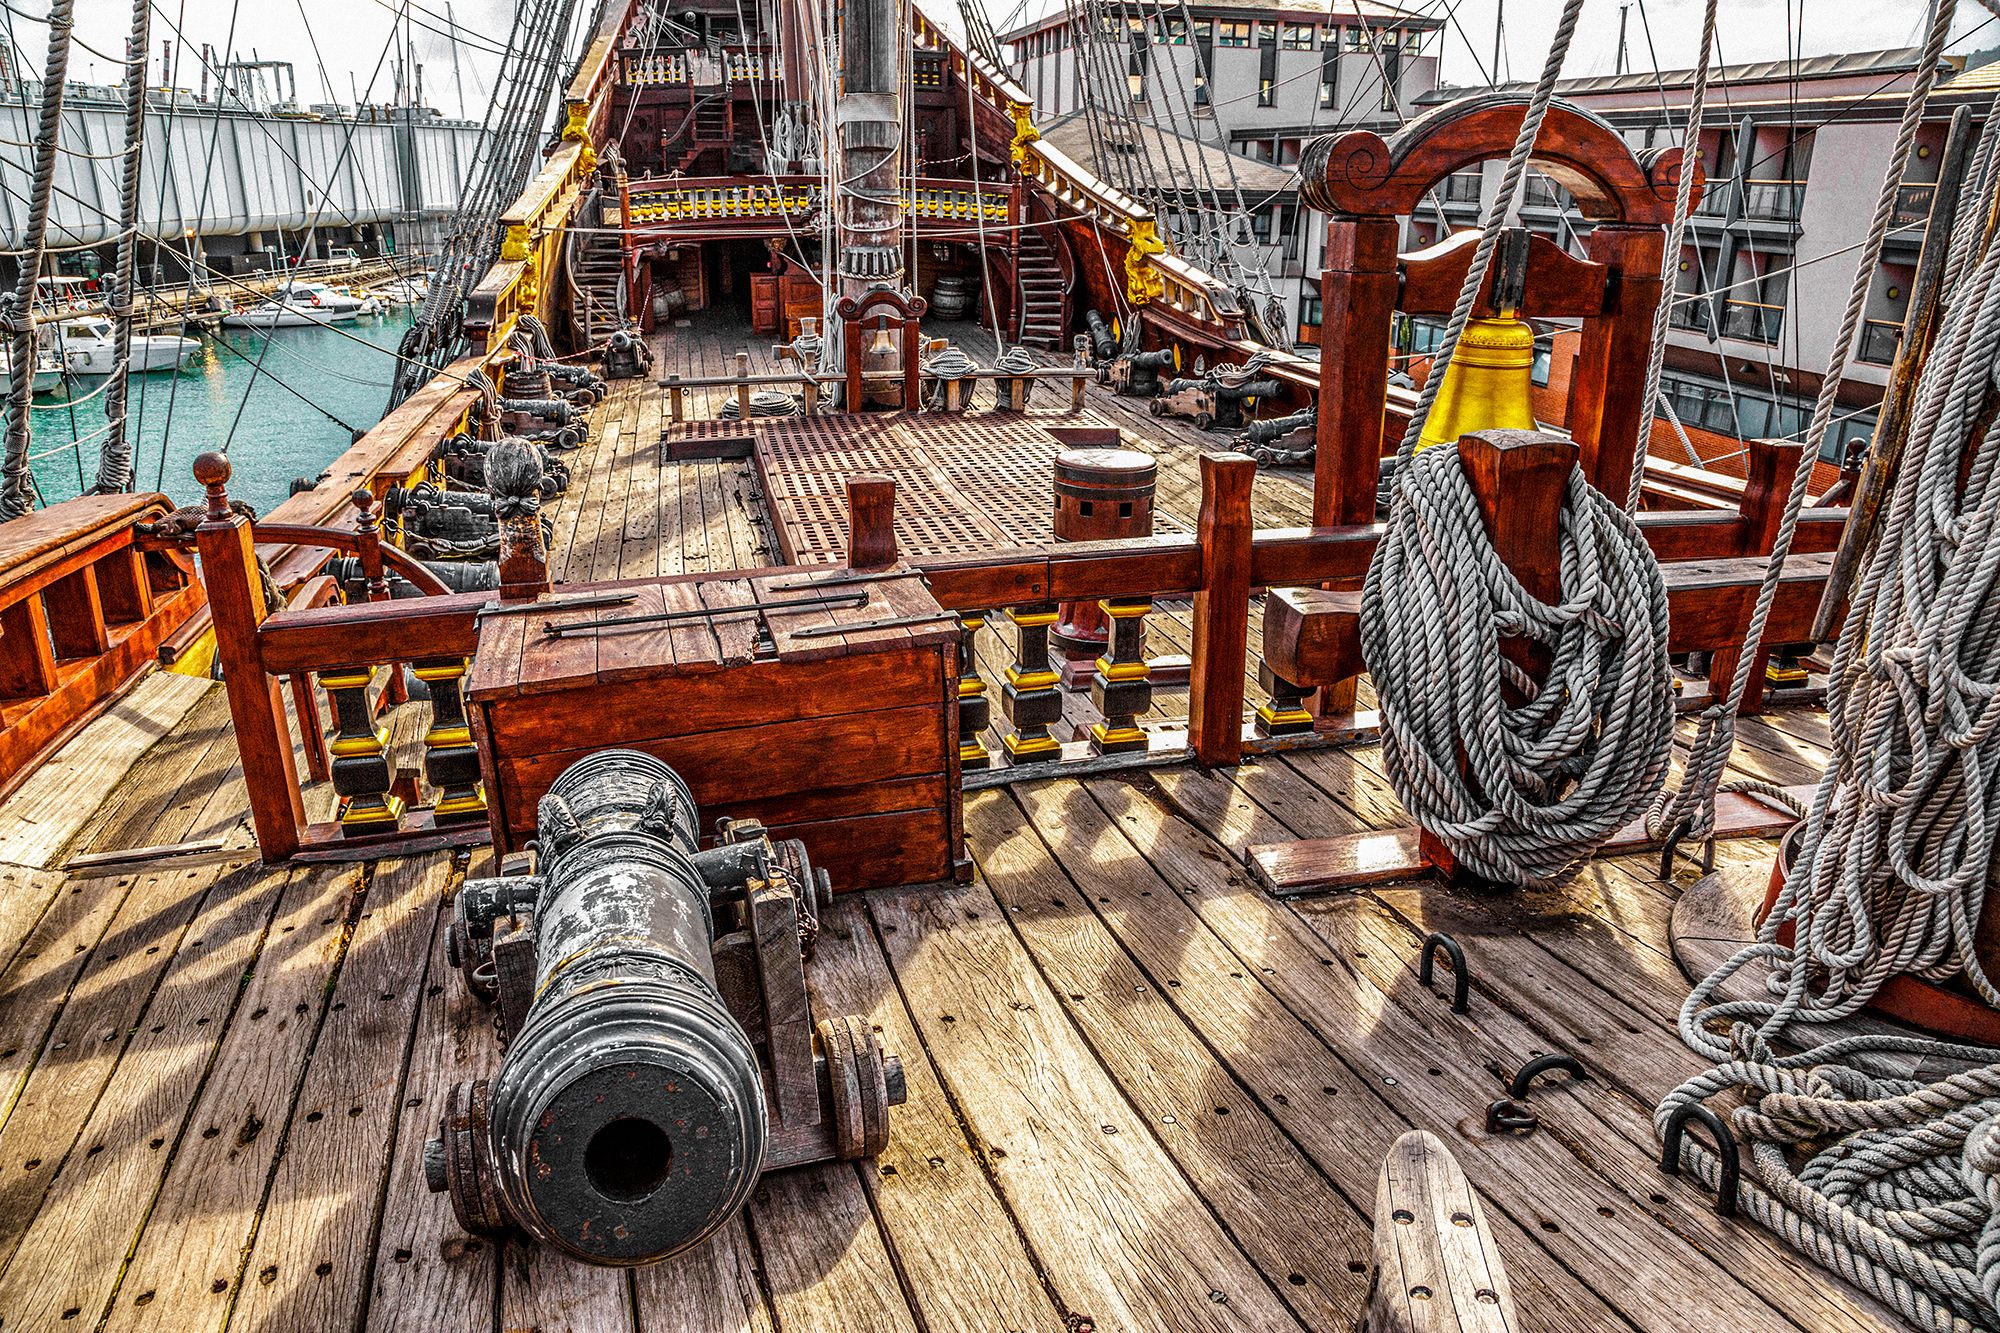 Wooden-Pirate-Ship-Top-Cannons